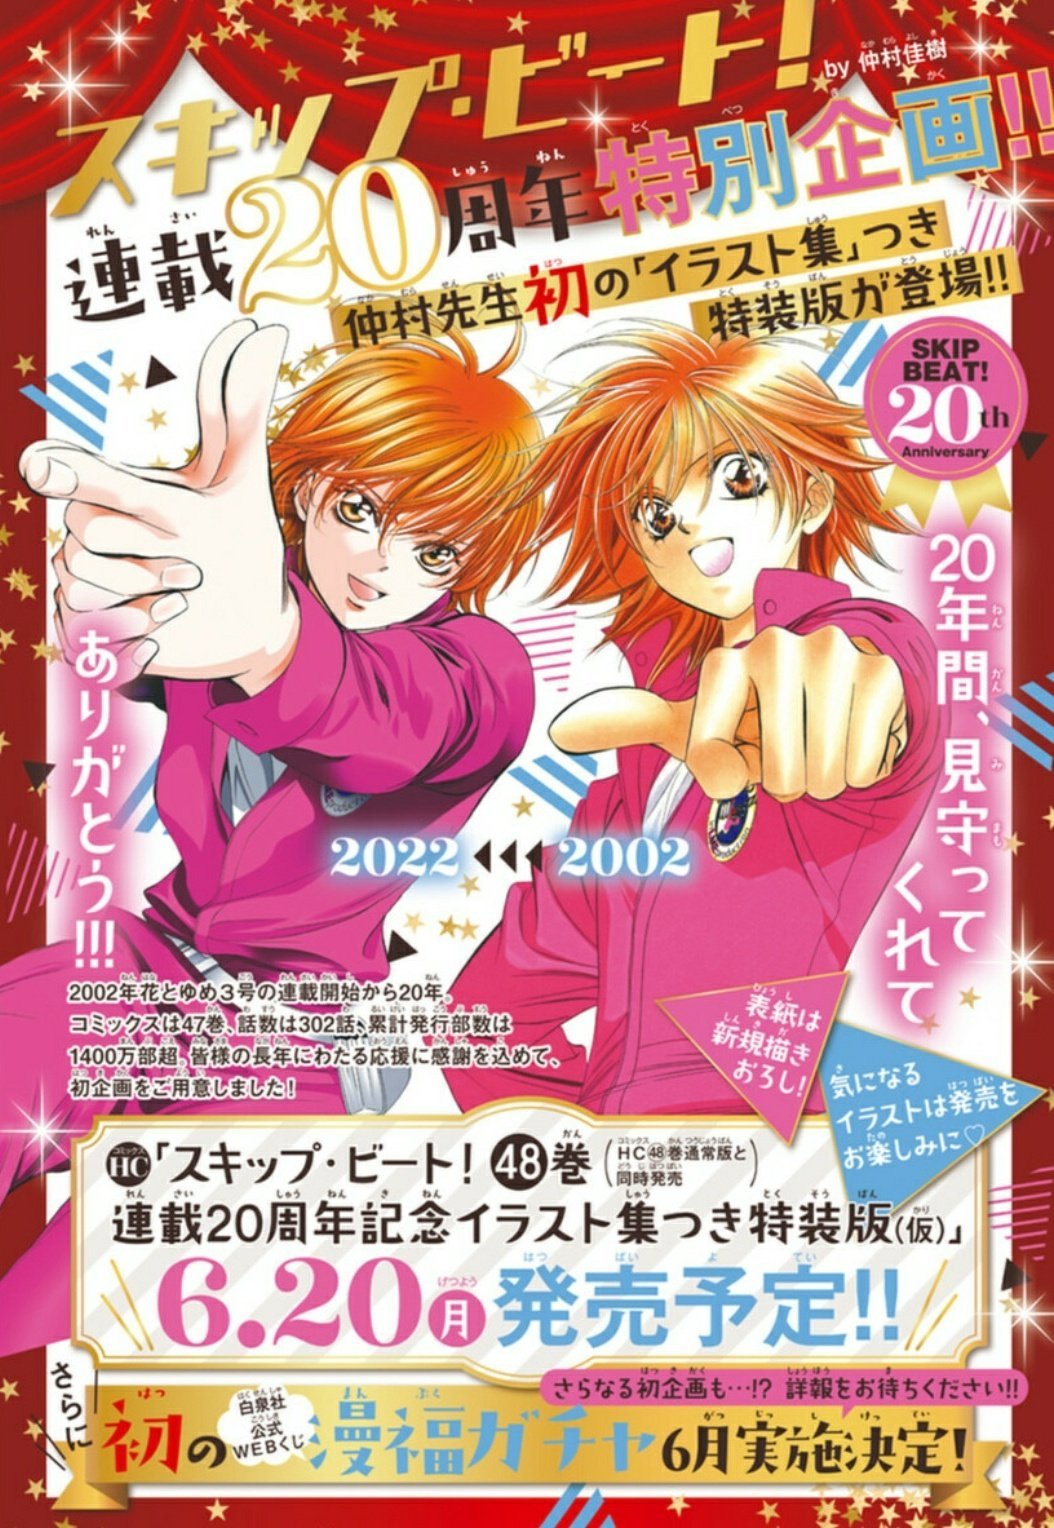 Chitara 1 Romance Enjoyer Happy th Anniversary Skip Beat Here S To More Years Of Greatness Following Kyoko S Journey To Become The Best Actress In Japan T Co N465r7r2d1 Twitter